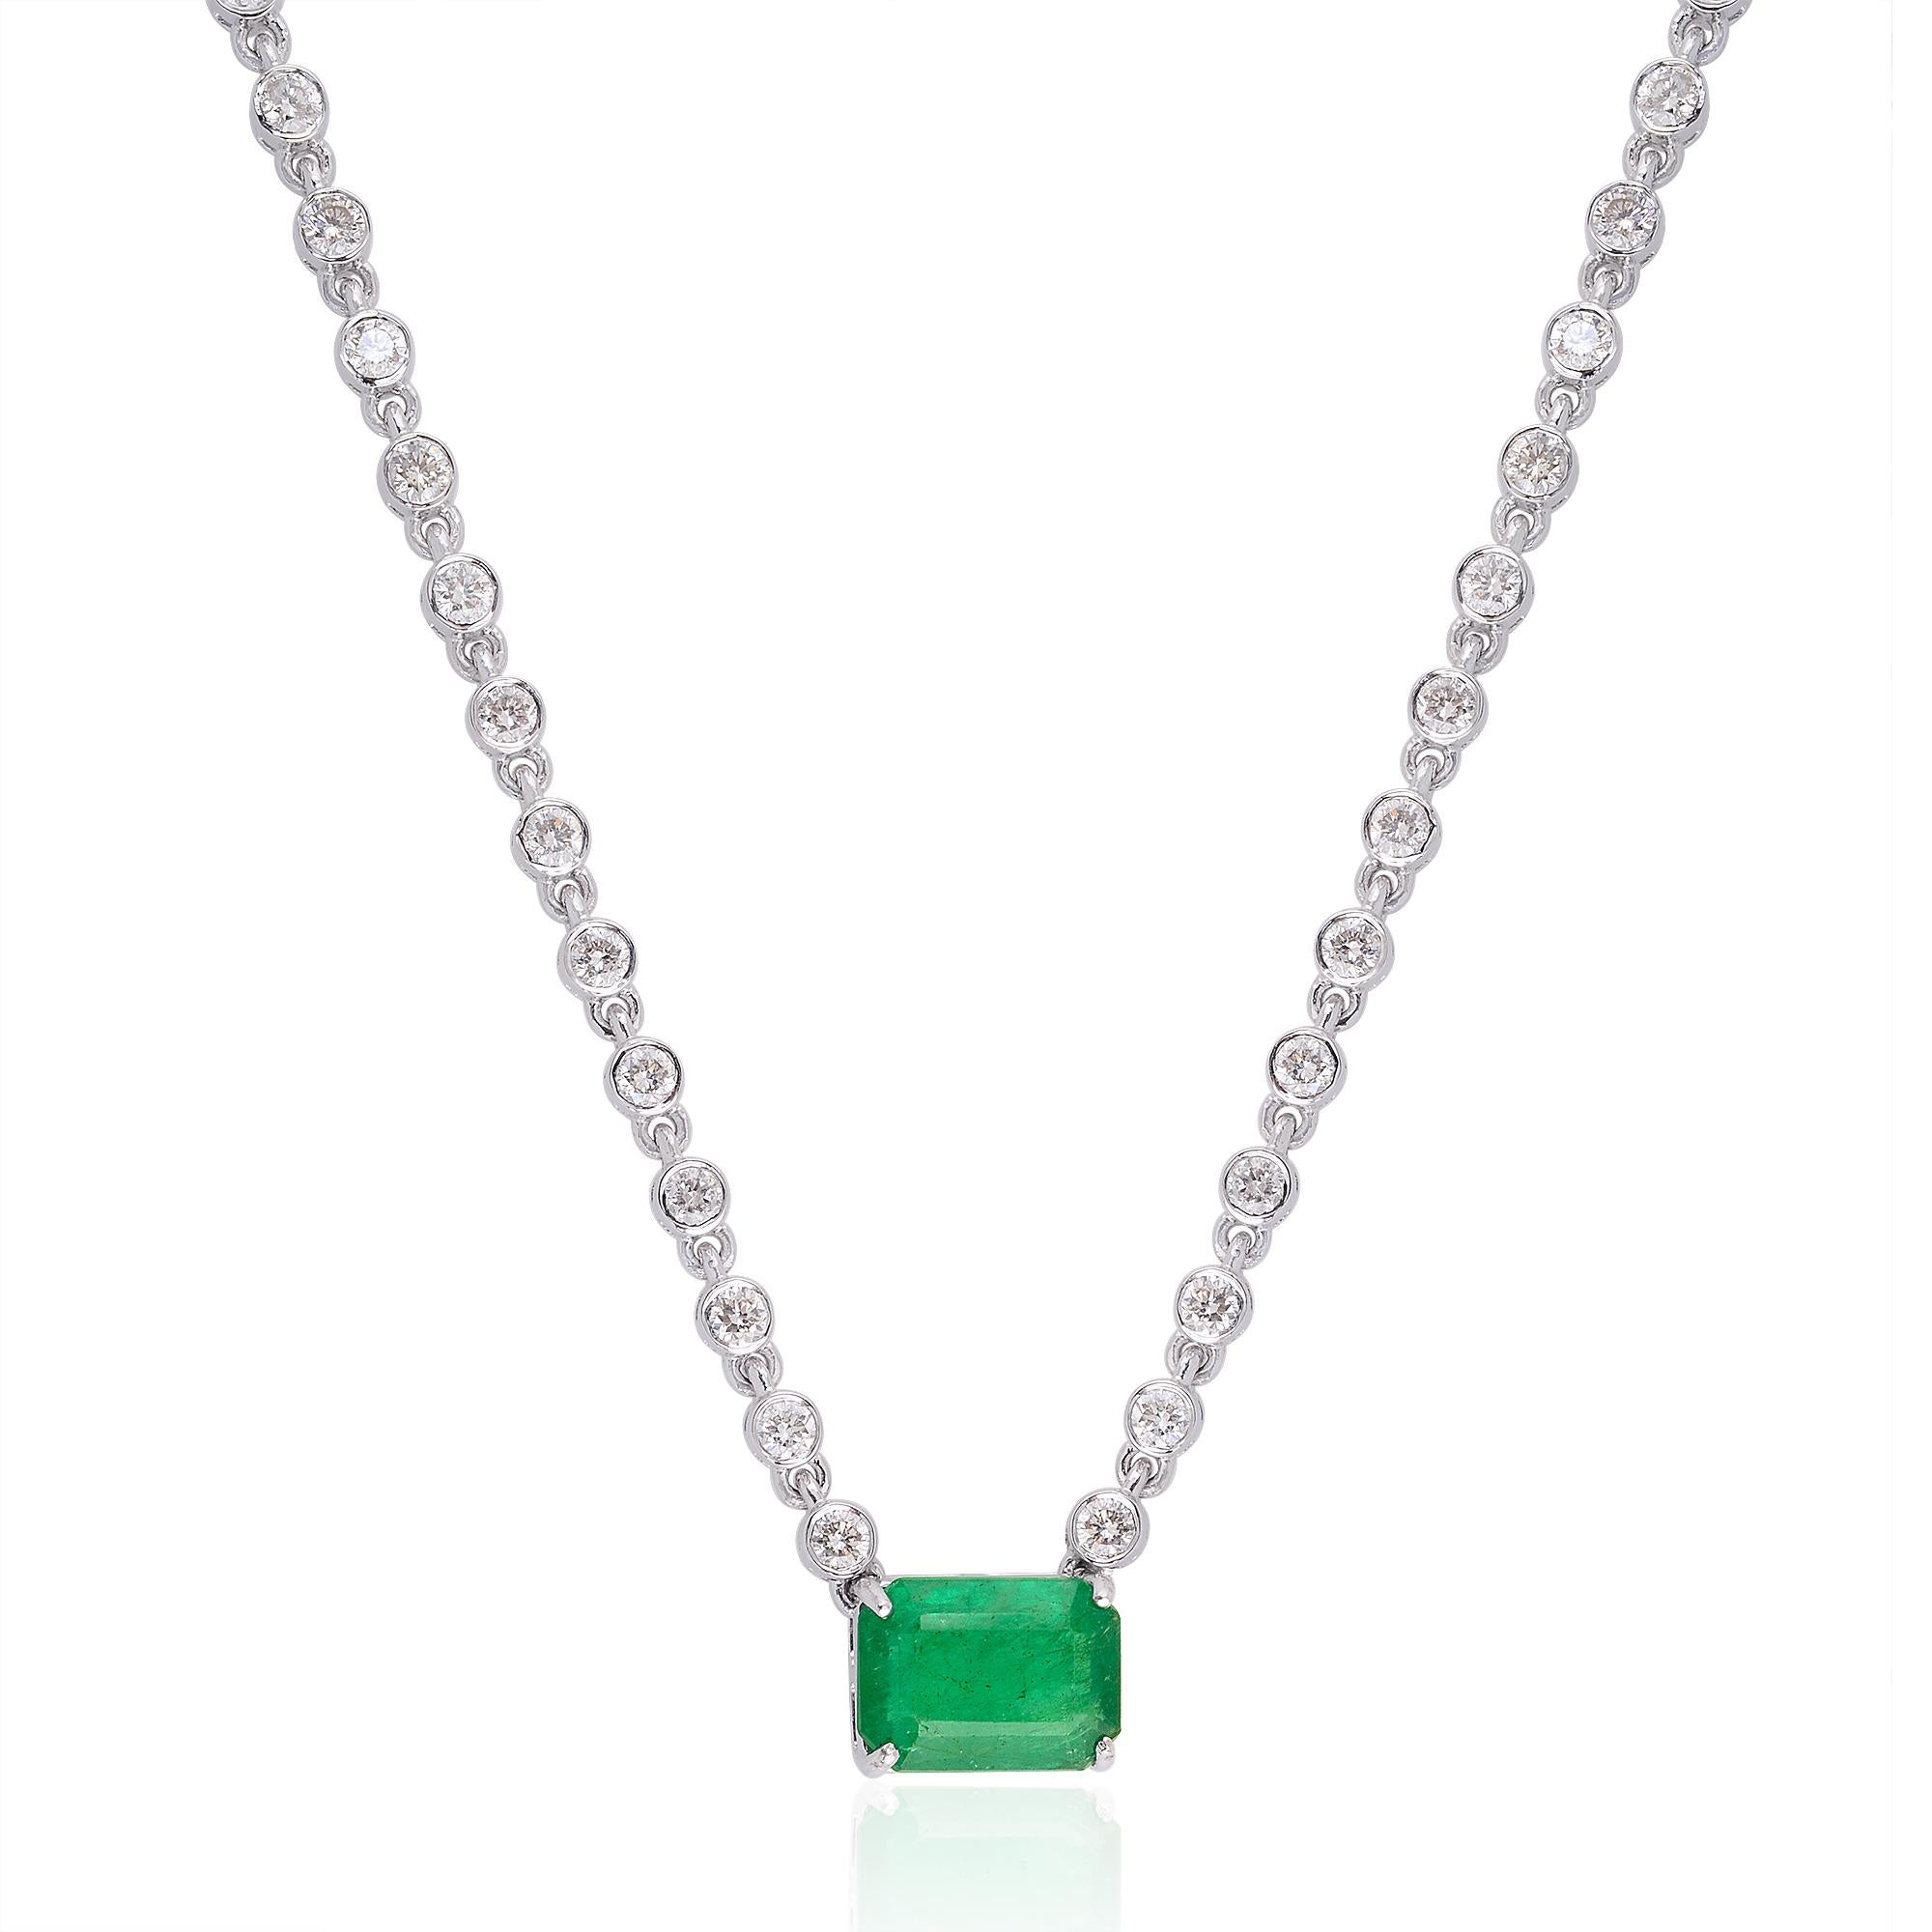 This Natural Emerald Diamond Charm Necklace is a testament to craftsmanship and elegance. It can be worn for both formal occasions and everyday wear, adding a touch of sophistication and allure to any outfit. It is also a meaningful gift choice,